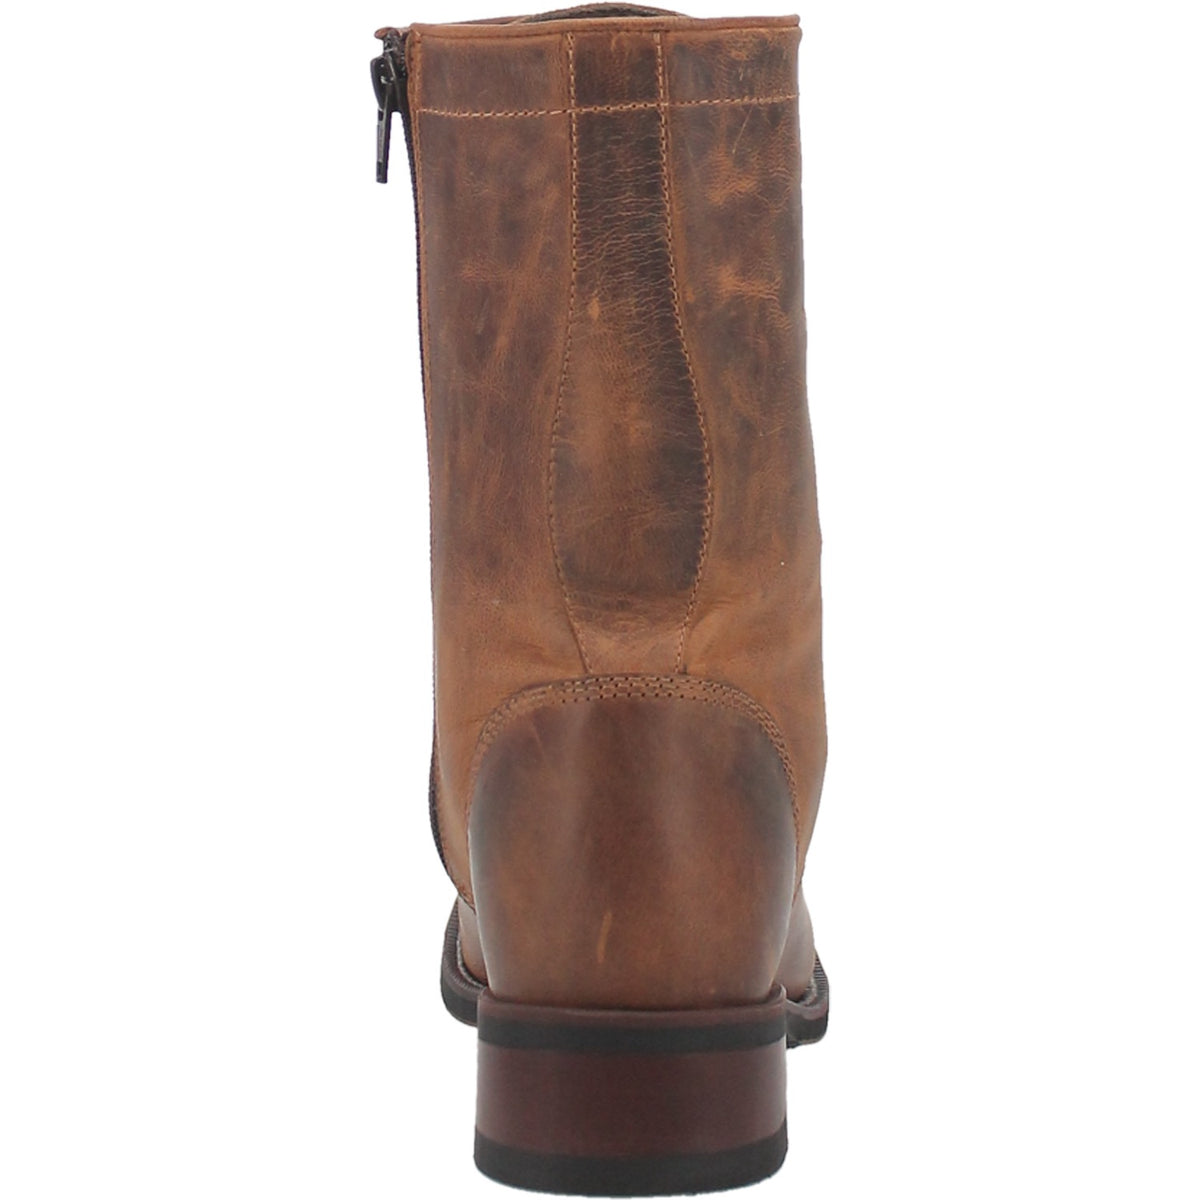 SARA ROSE LEATHER BOOT Cover